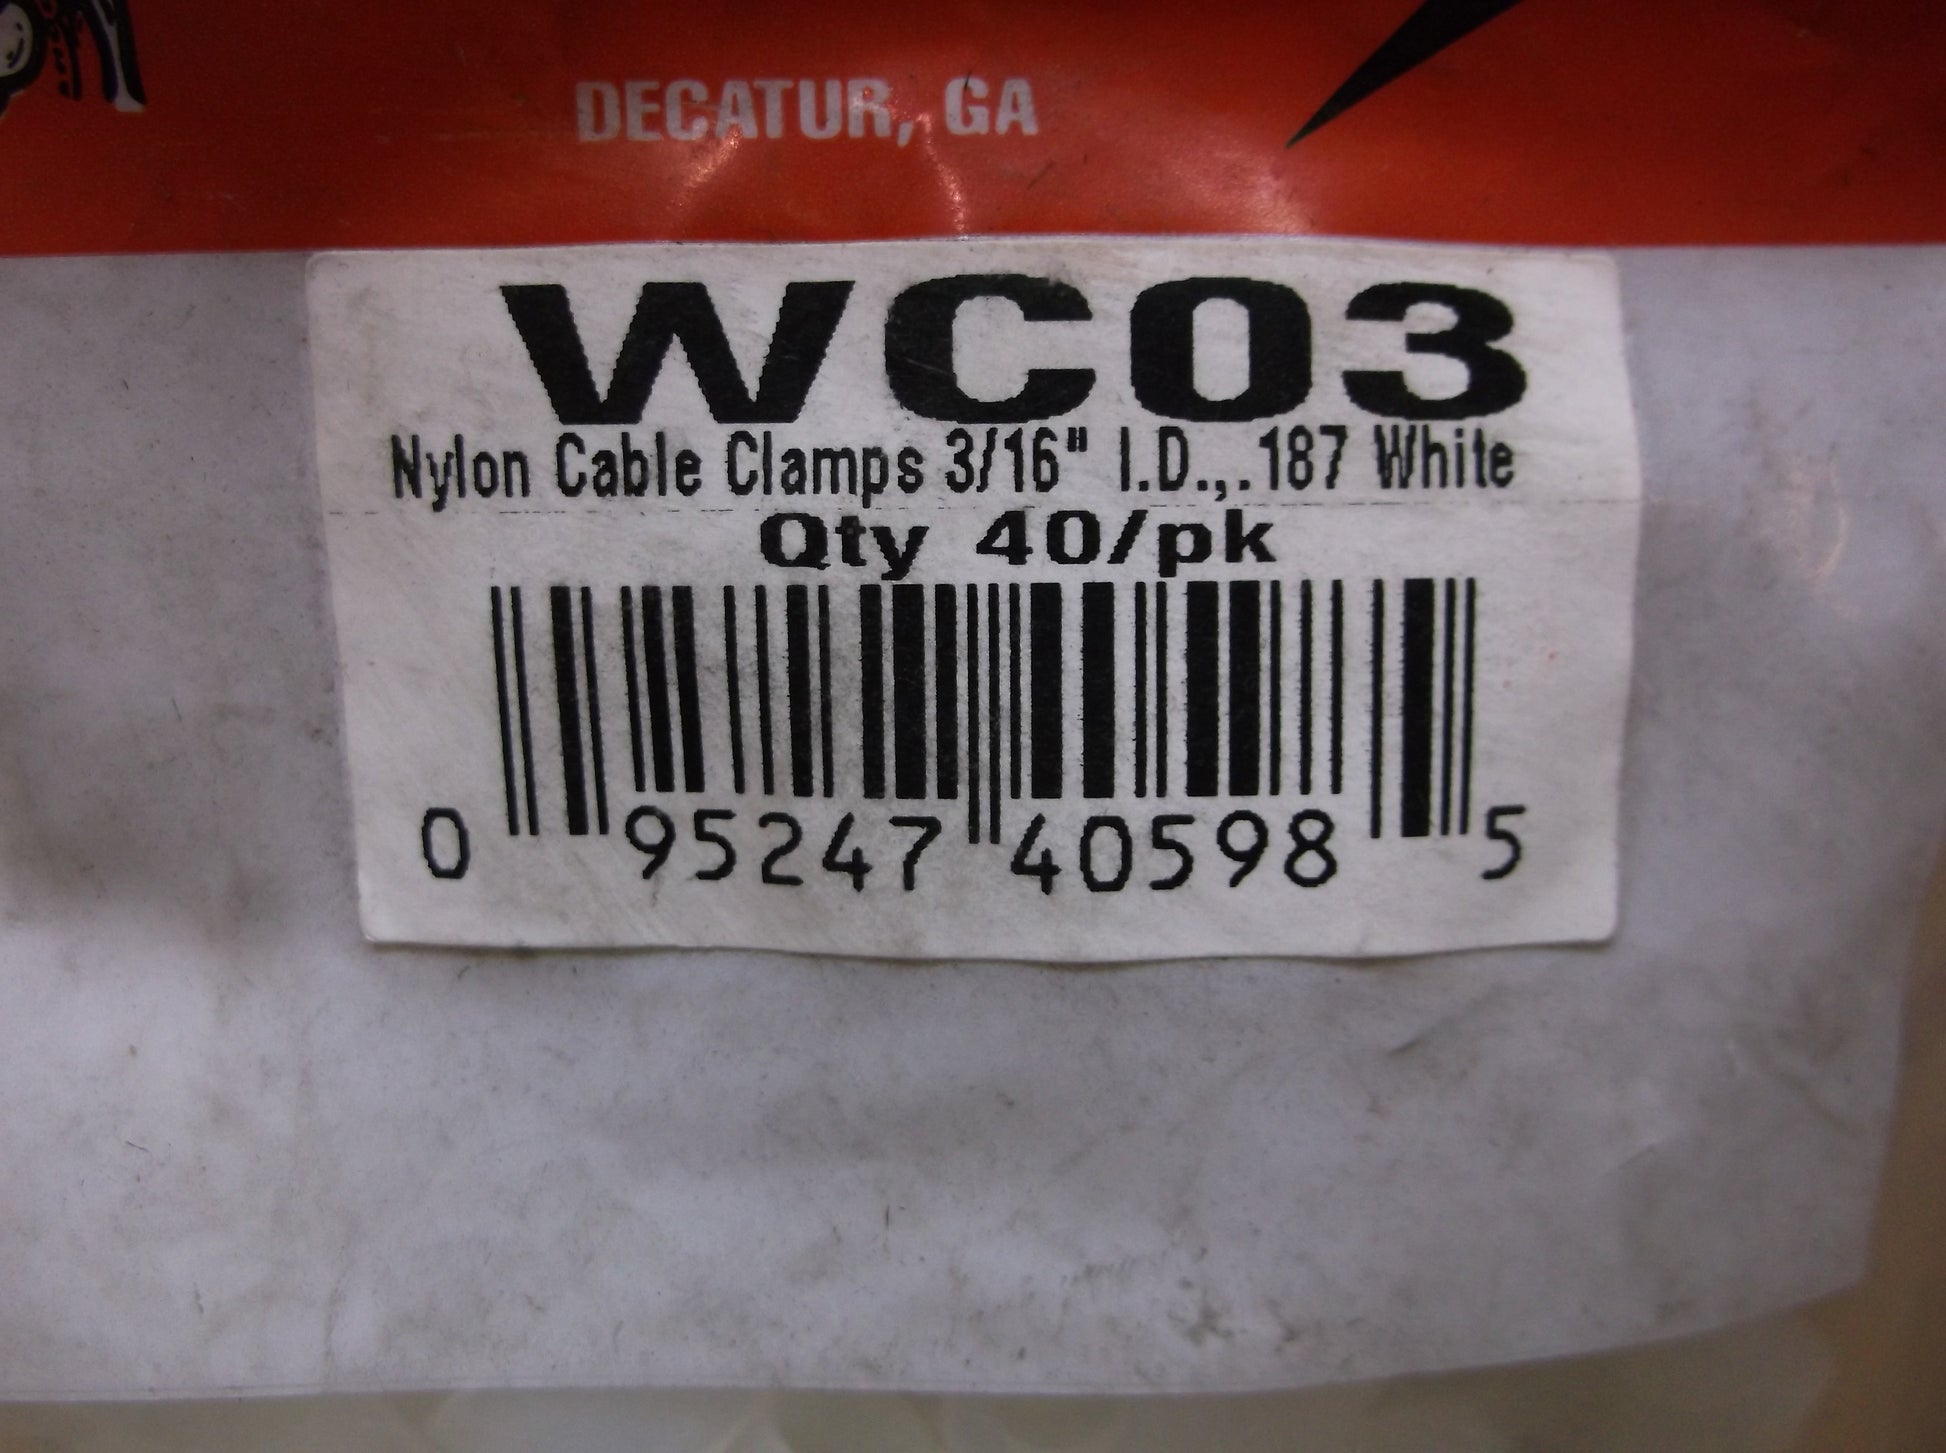 NYLON CABLE CLAMPS 3/16" I.D.  (QTY 40/PACK)